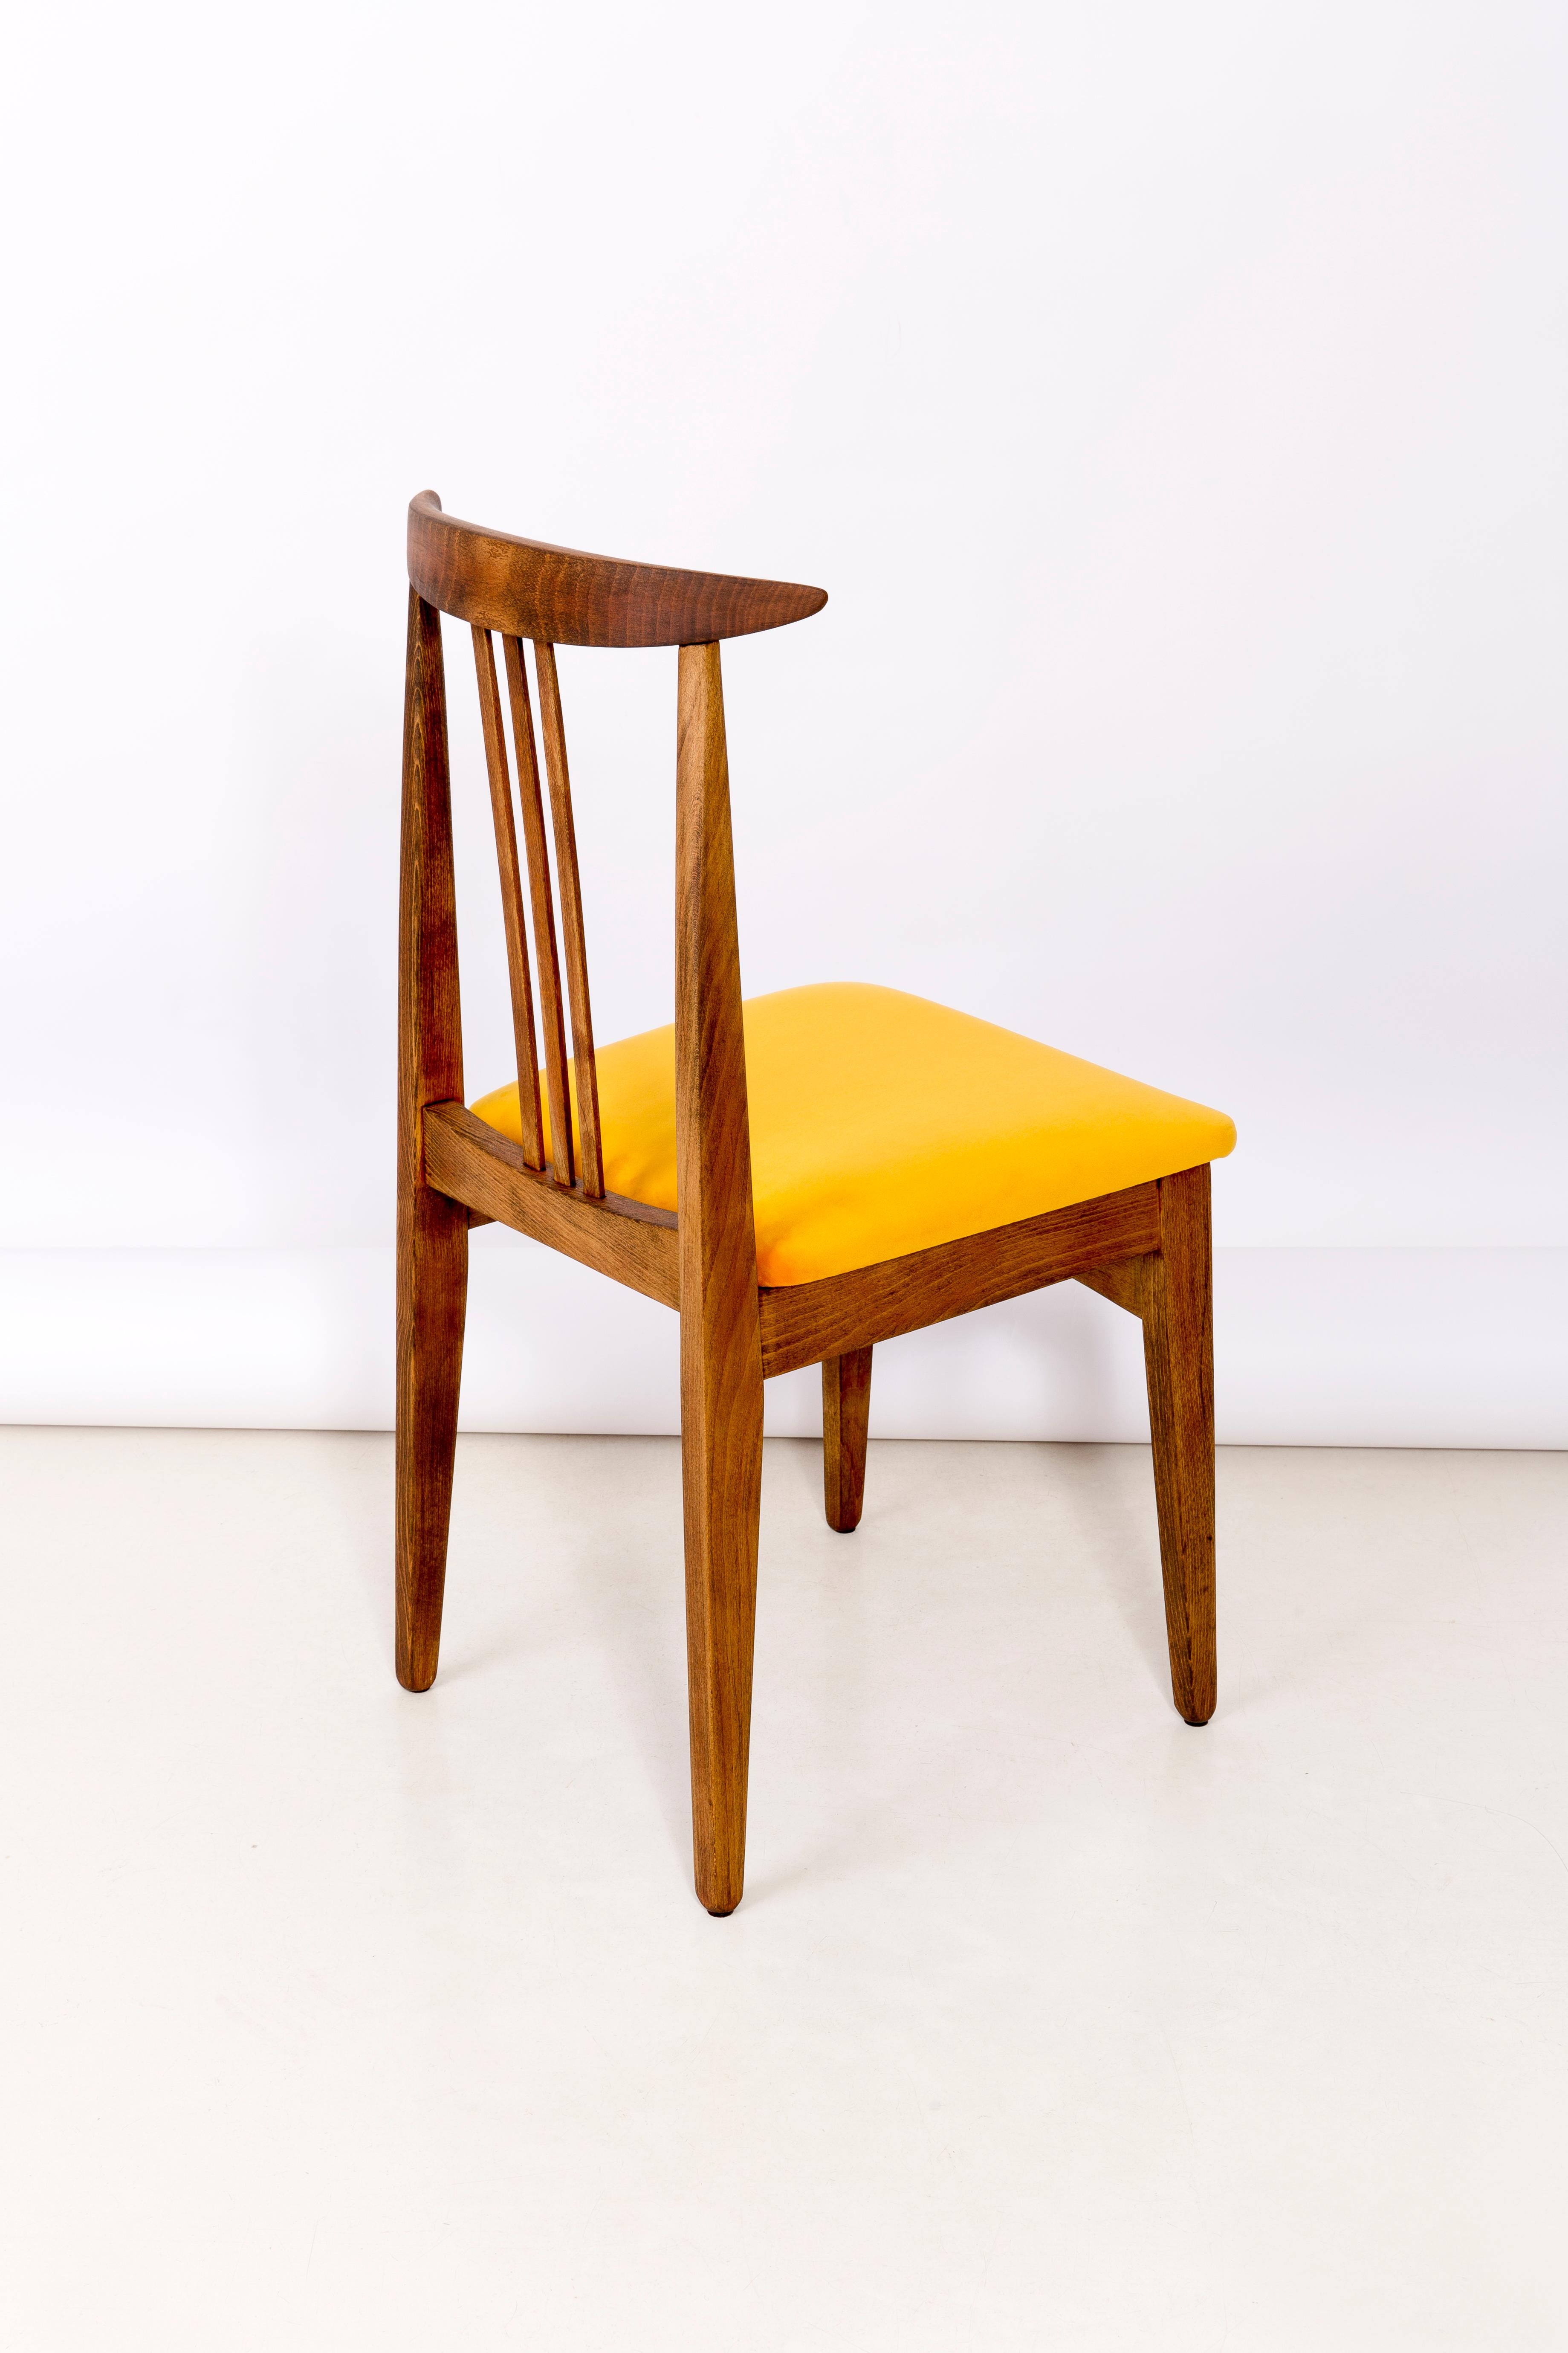 Set of Eight Yellow Chairs, by Zielinski, Europe, 1960s For Sale 3